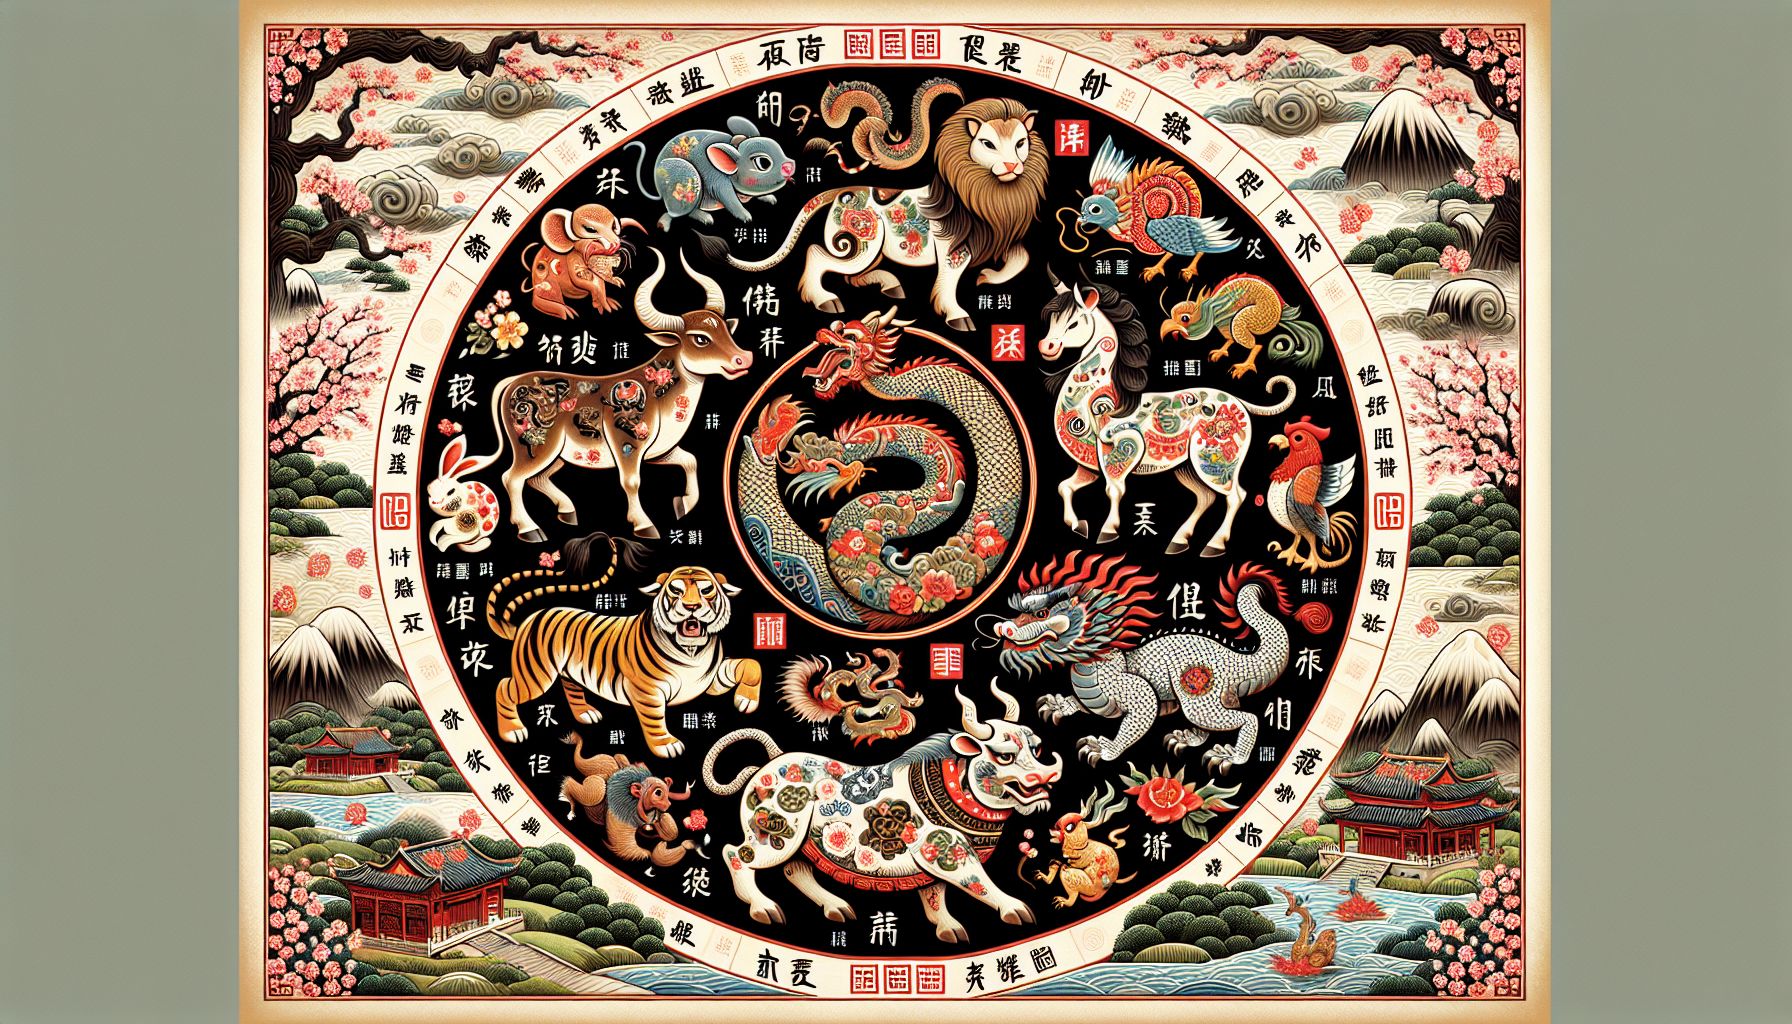 Illustration of Chinese zodiac signs